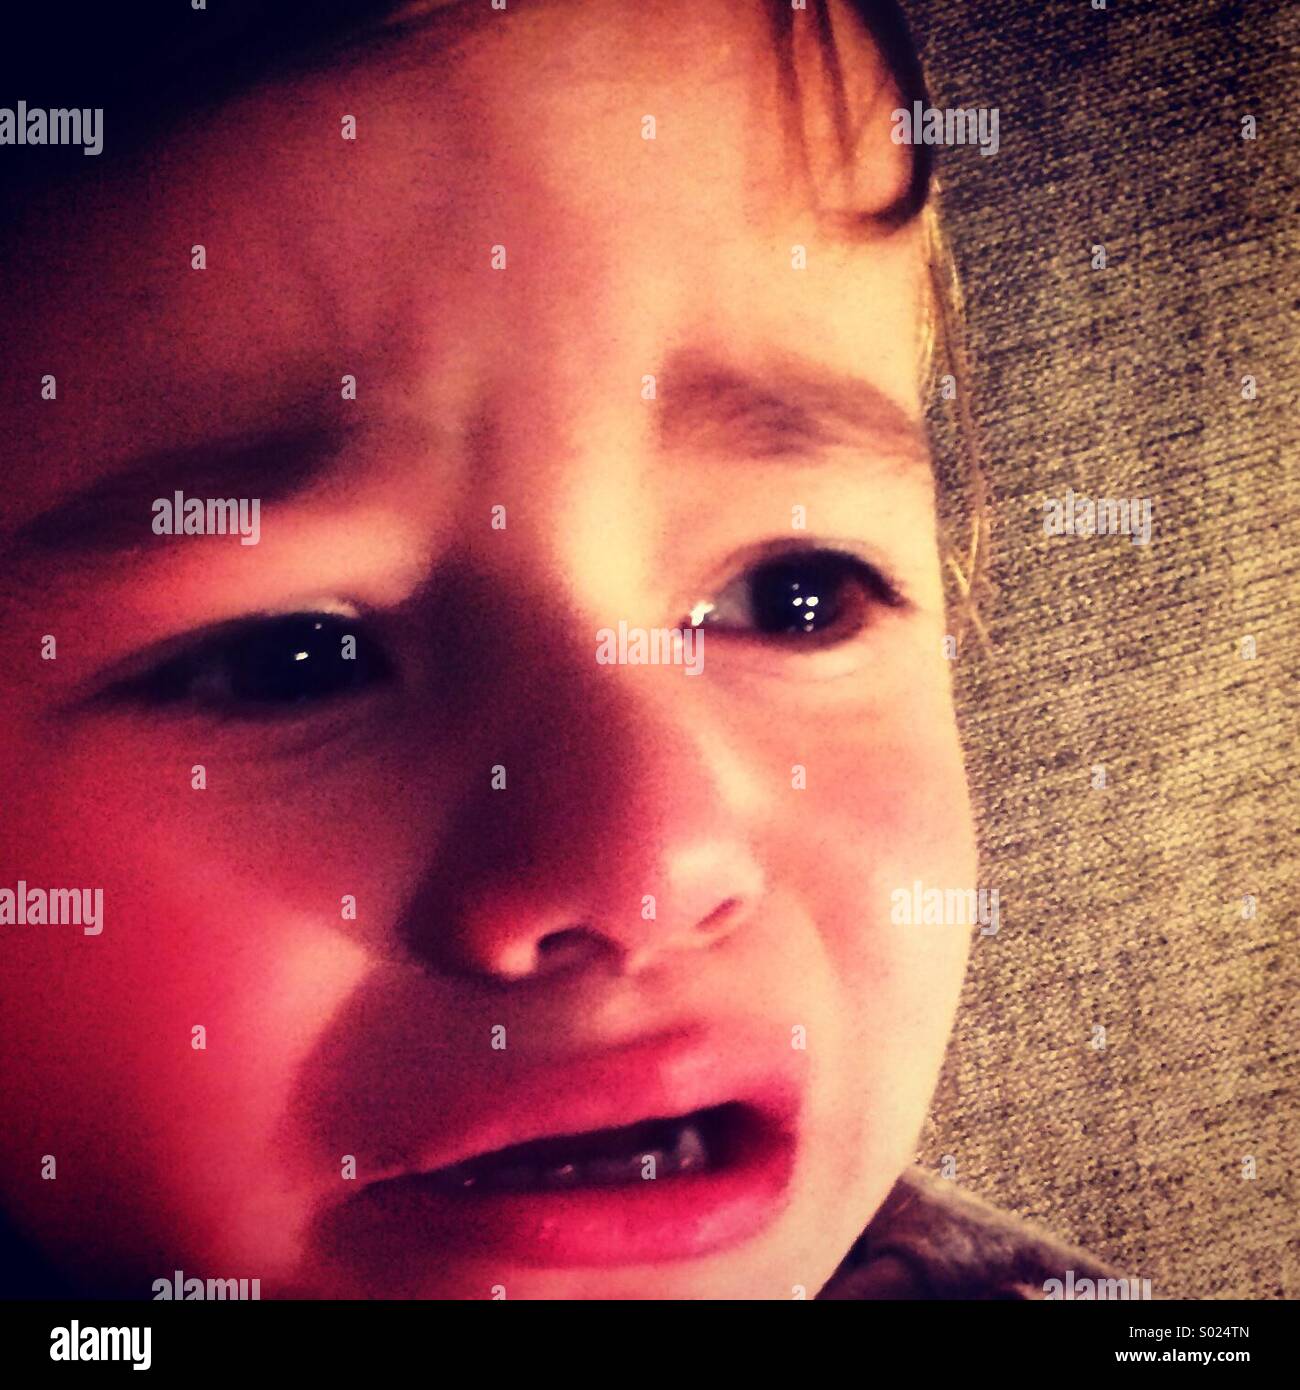 Two year old boy crying. Stock Photo